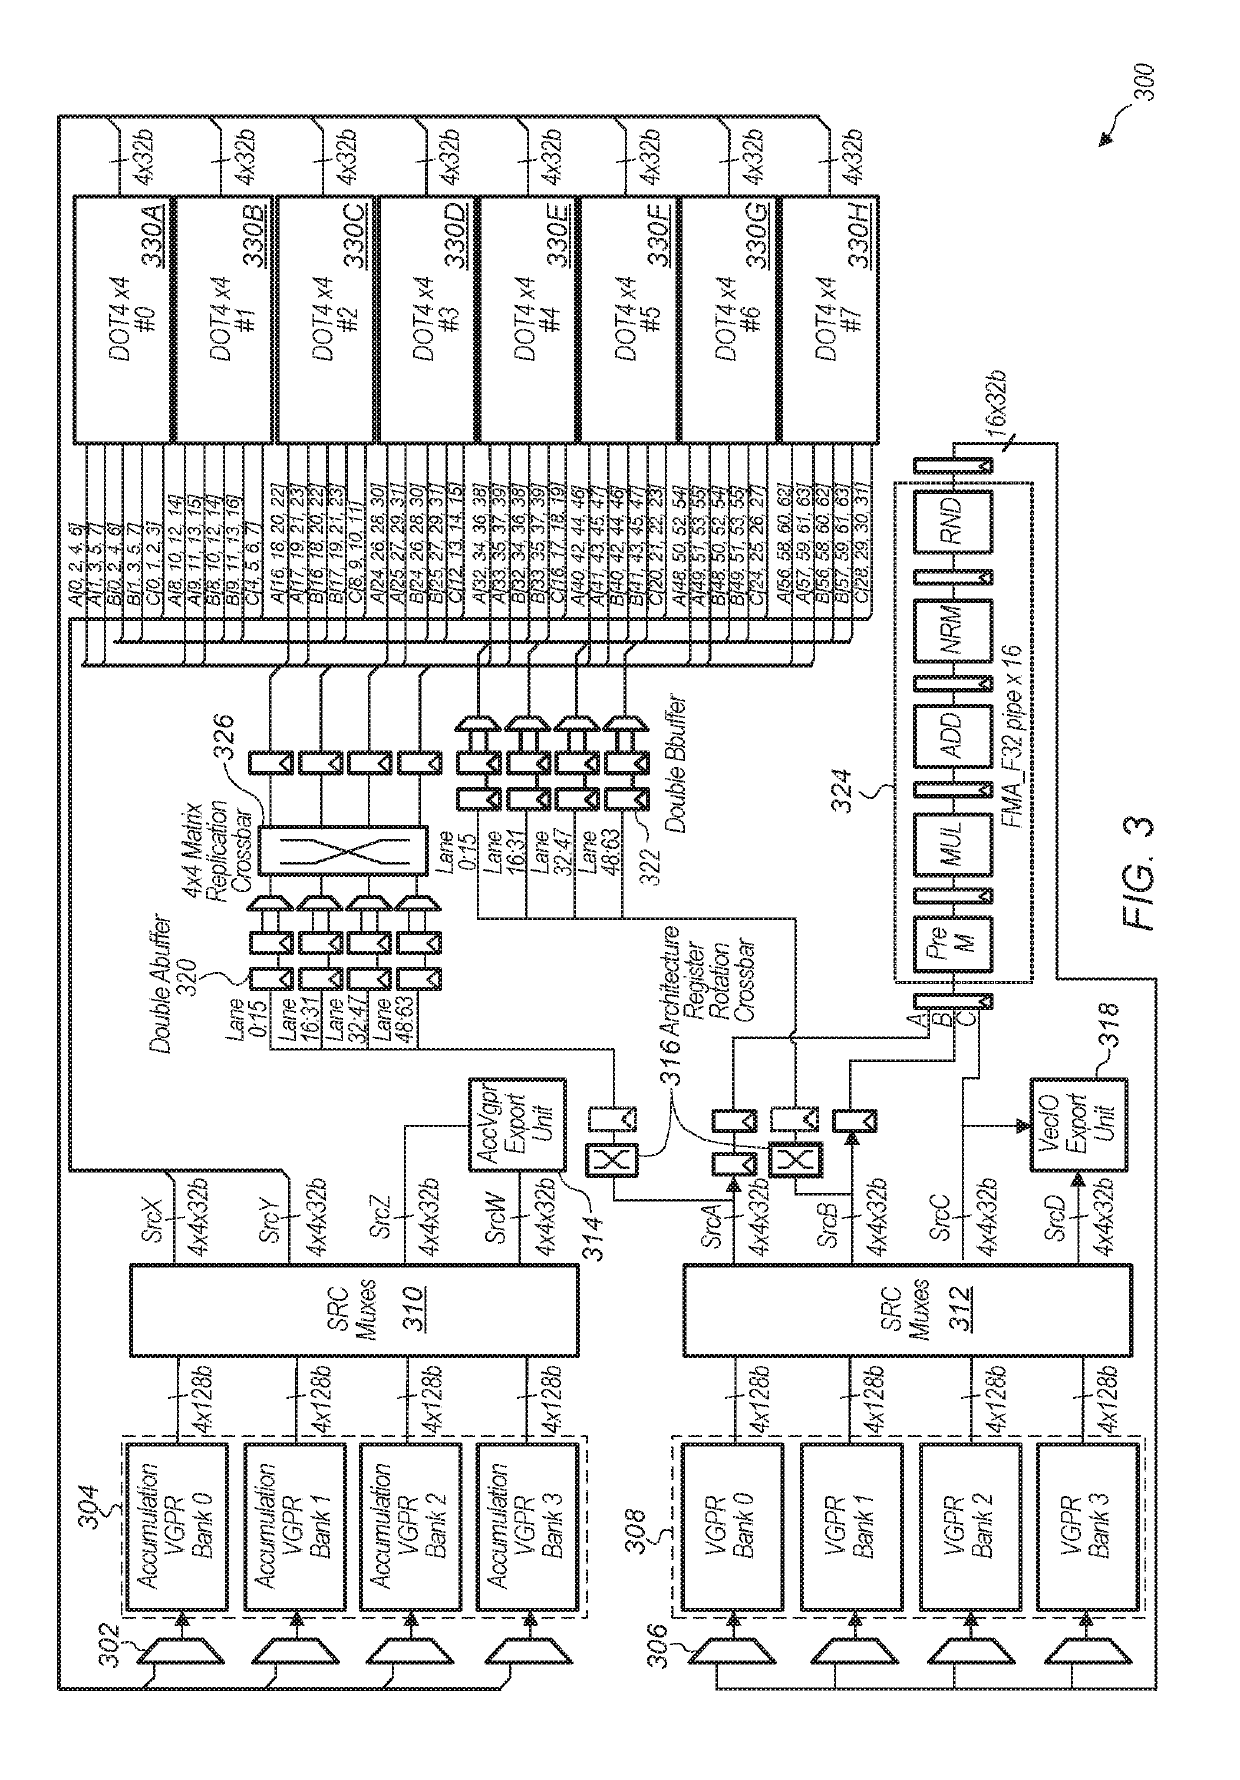 Stream processor with low power parallel matrix multiply pipeline